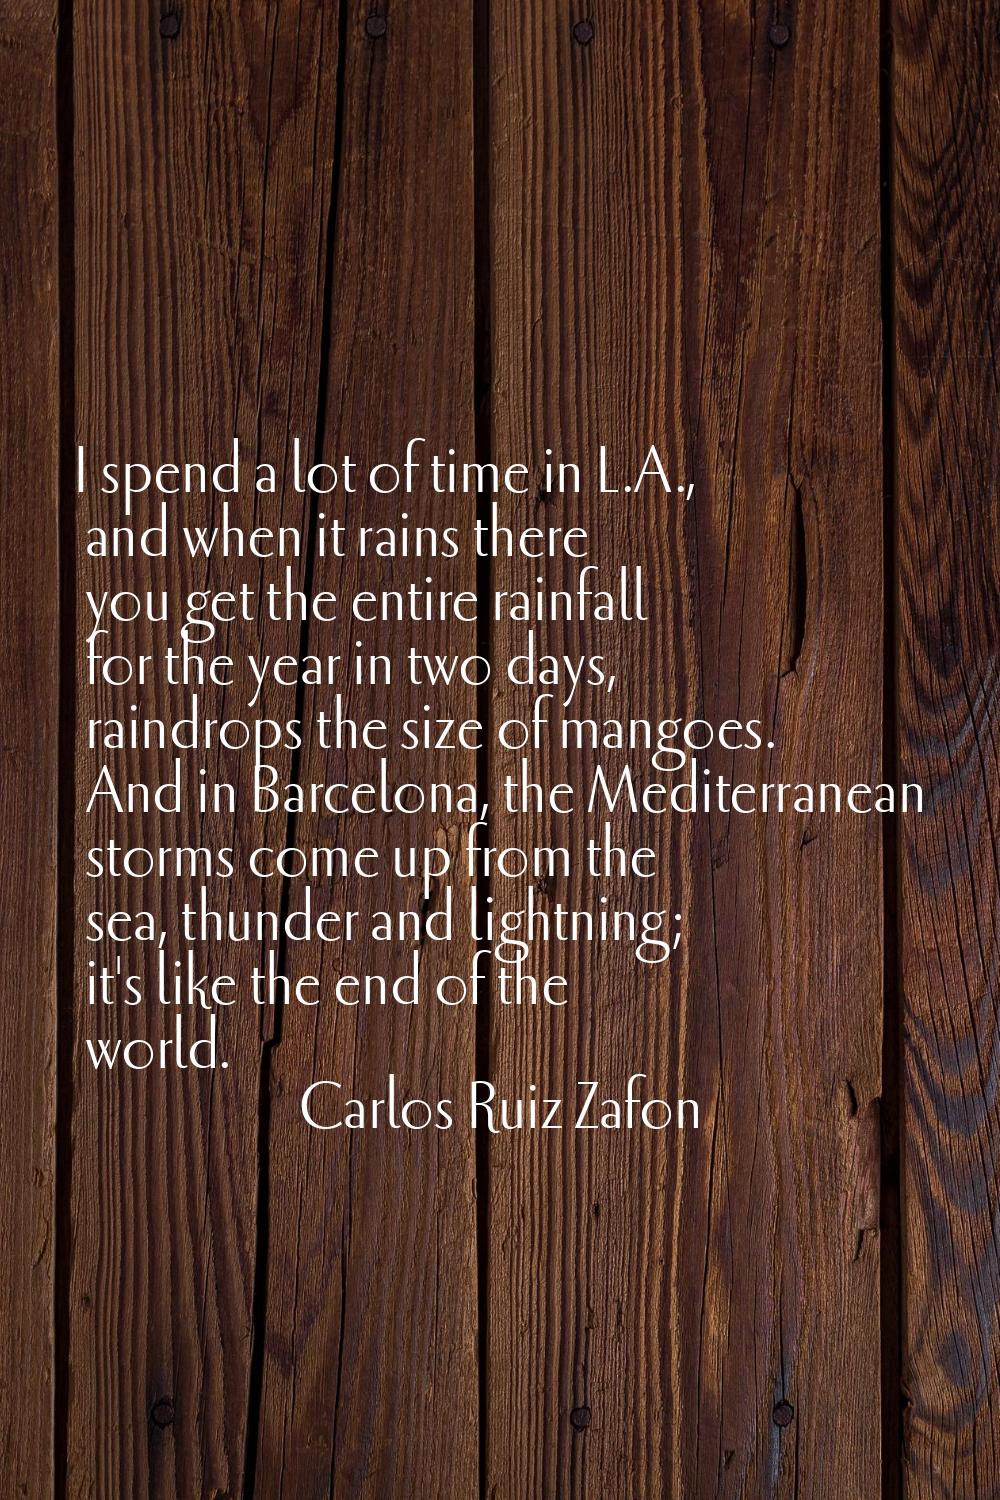 I spend a lot of time in L.A., and when it rains there you get the entire rainfall for the year in 